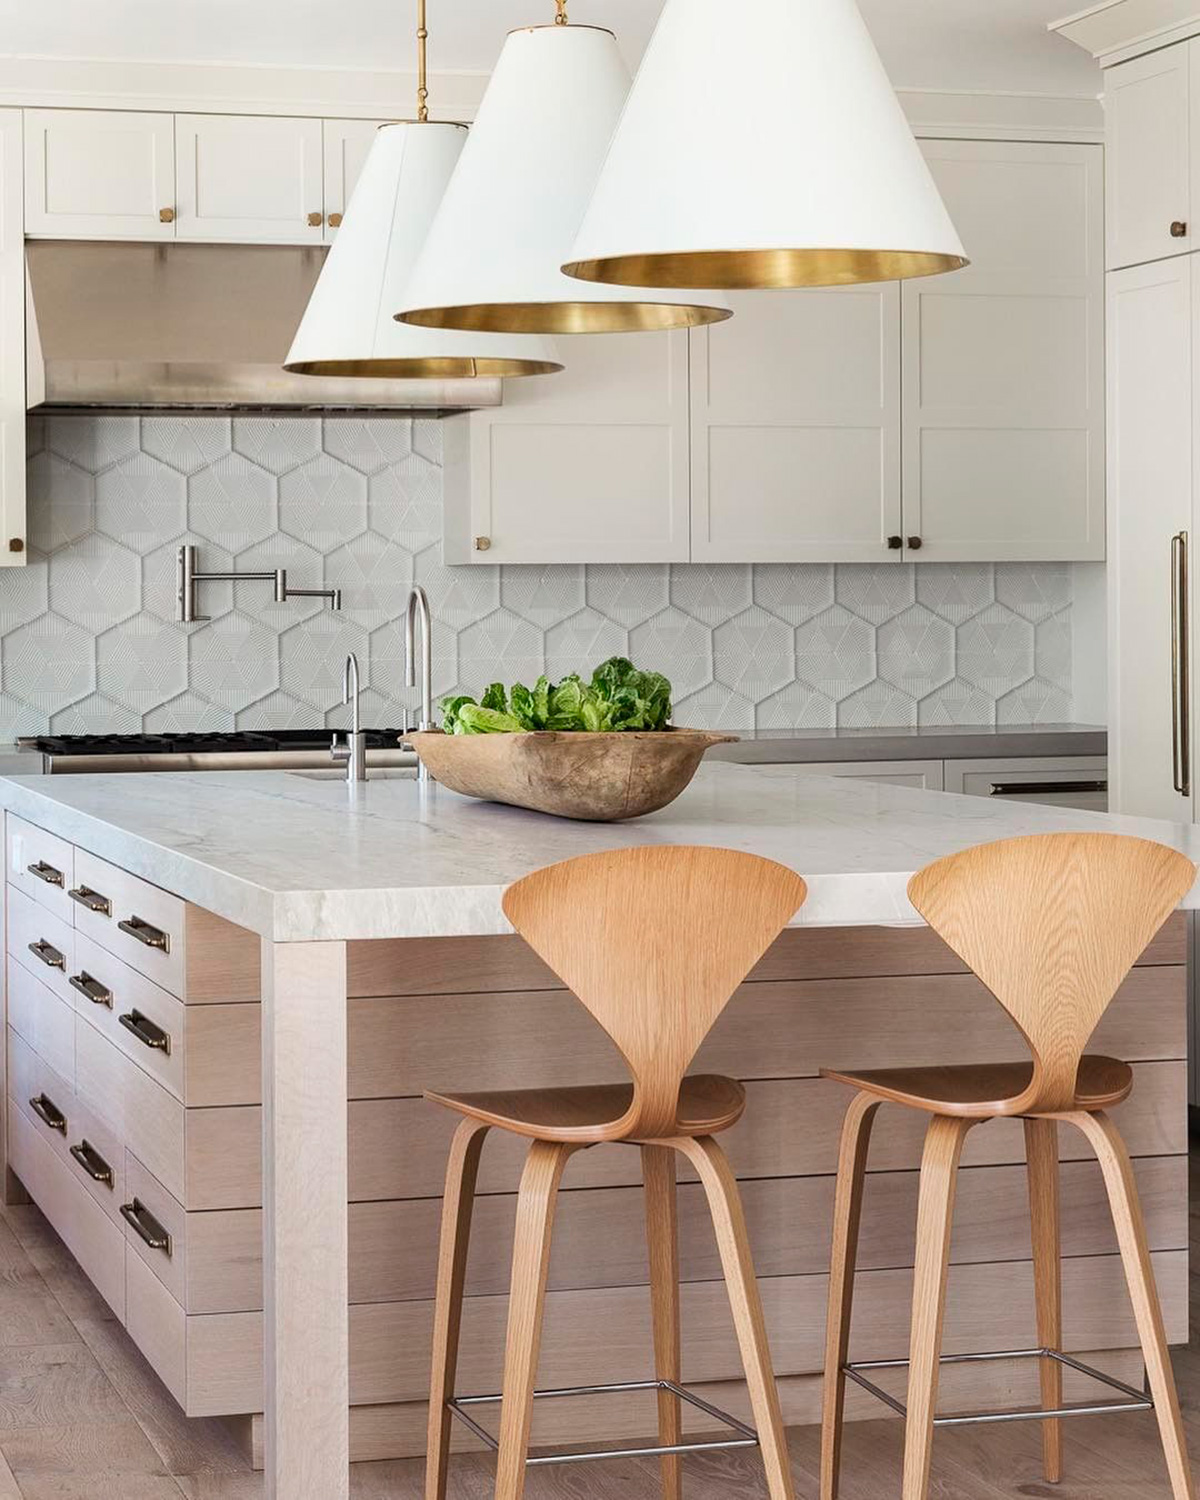 2019 Kitchen Trends That Affect Lighting